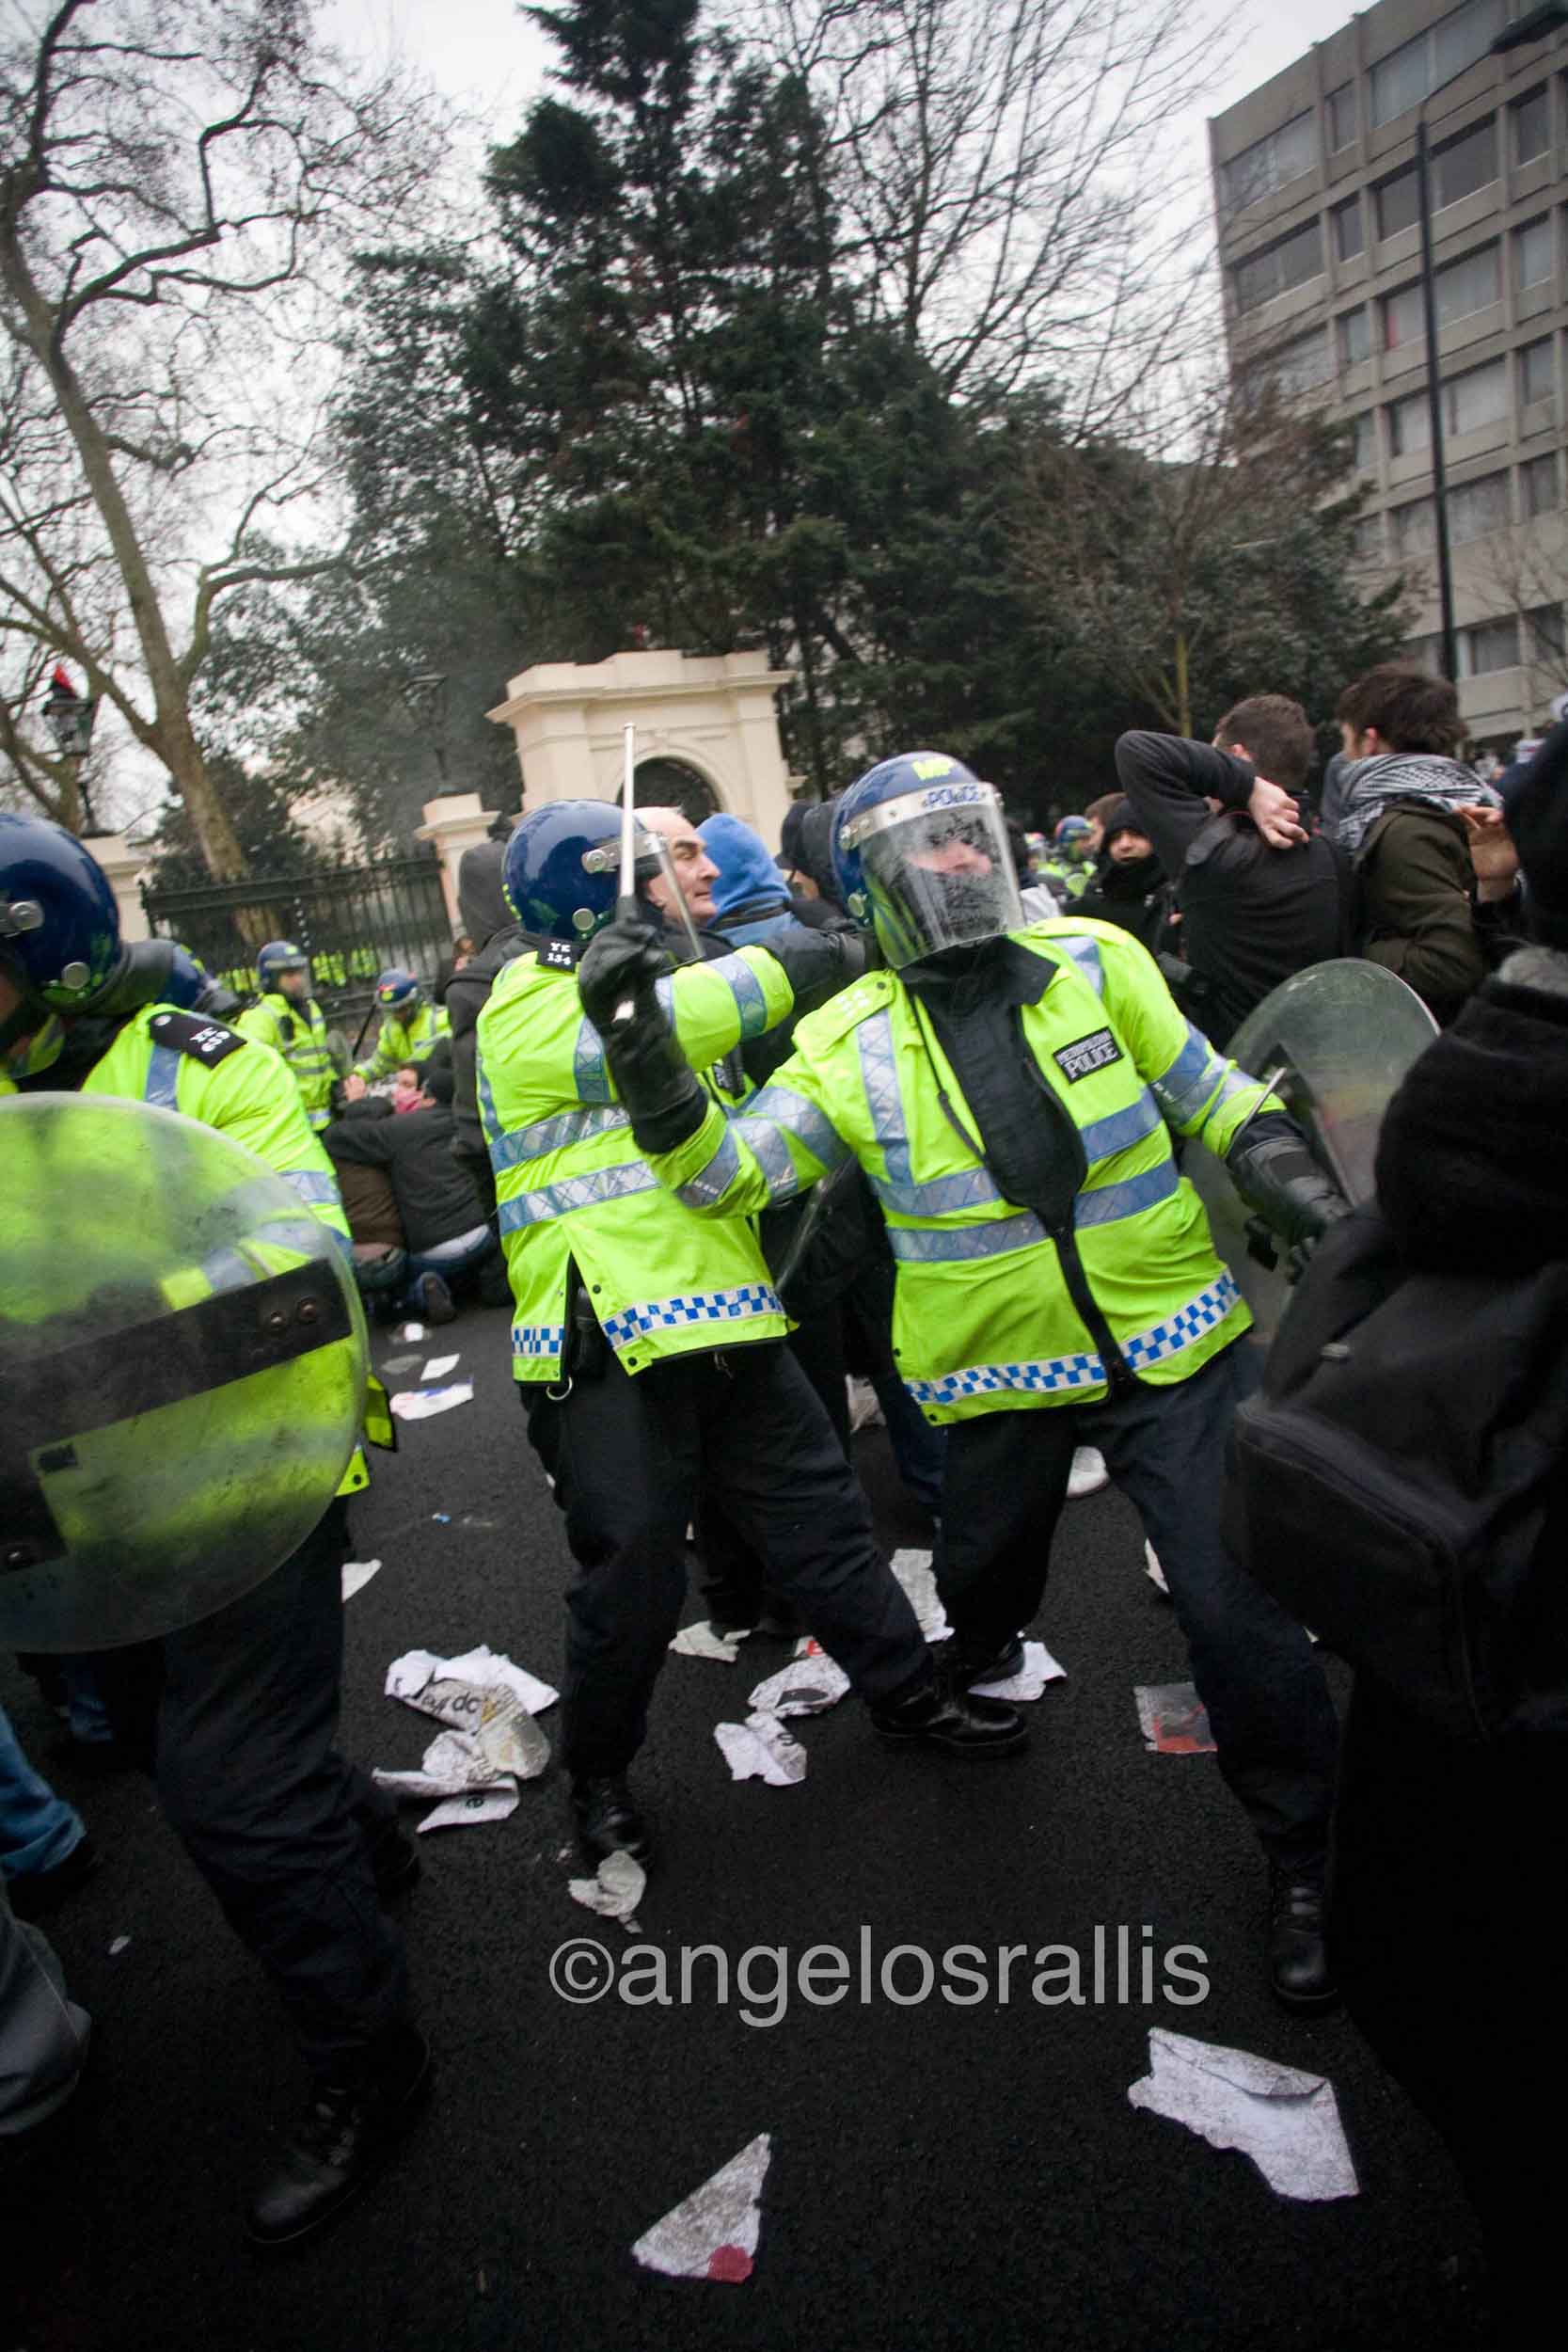 Anti-riot police shows no mercy and attacks crowd